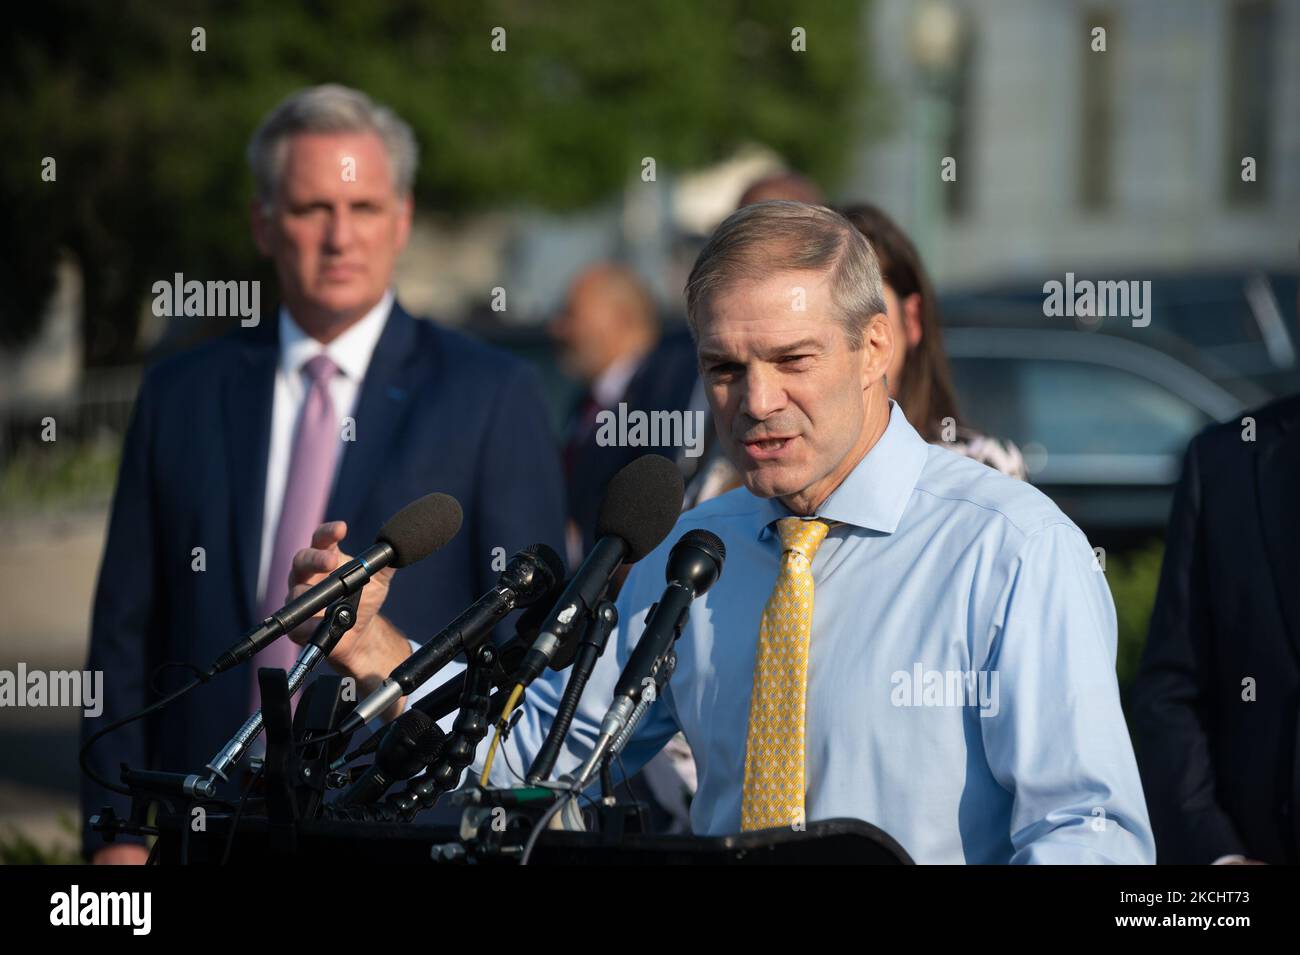 Repubican Leader Kevin McCarthy, Republican Whip Steve Scalise, Rep. Jim Jordan, Republican Conference Chairwoman Elise Stefanik and others hold a press conference in front of the U.S. Capitol July 27, 2021 in Washington, DC. Leader McCarthy held a news conference to discuss the January 6th Committee. (Photo by Zach D Roberts/NurPhoto) Stock Photo